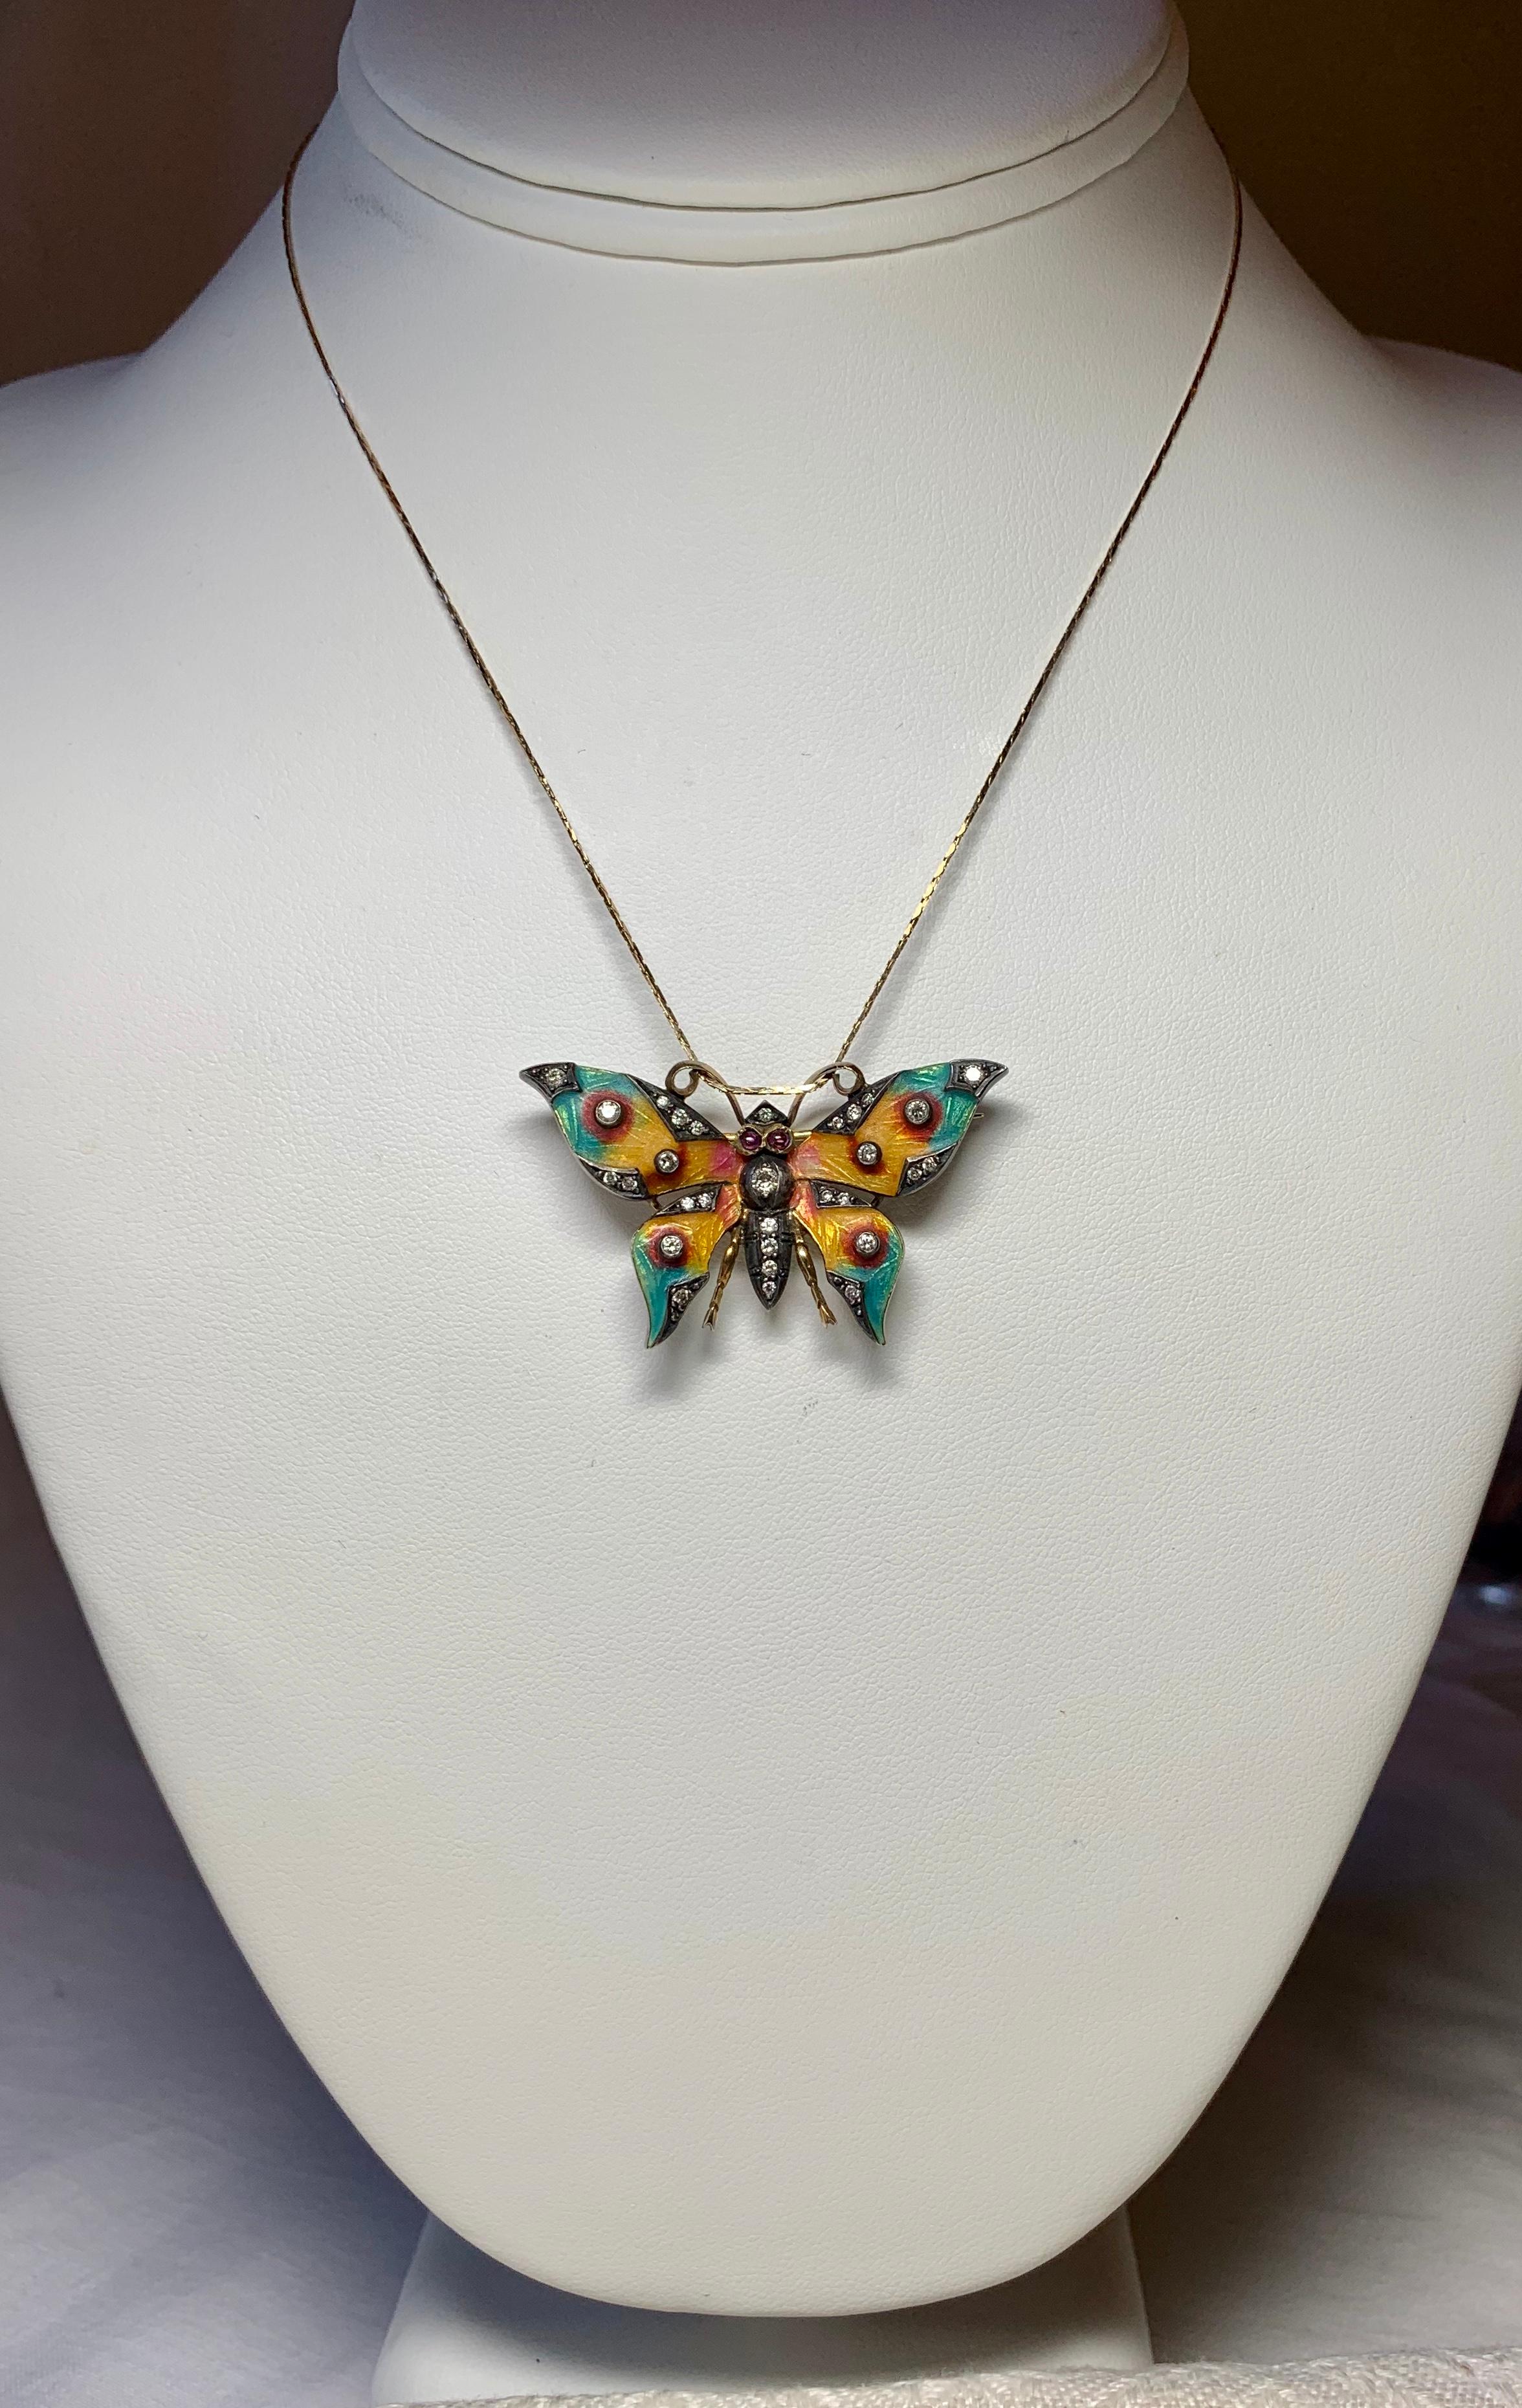 A wonderful and rare early Art Nouveau Brooch Pendant in the form of a Butterfly.  The magnificent Butterfly is 18 Karat Gold. 
It is set with 30 gorgeous Old Mine Cut Diamonds.  These diamonds are just stunning - very white with the incredible